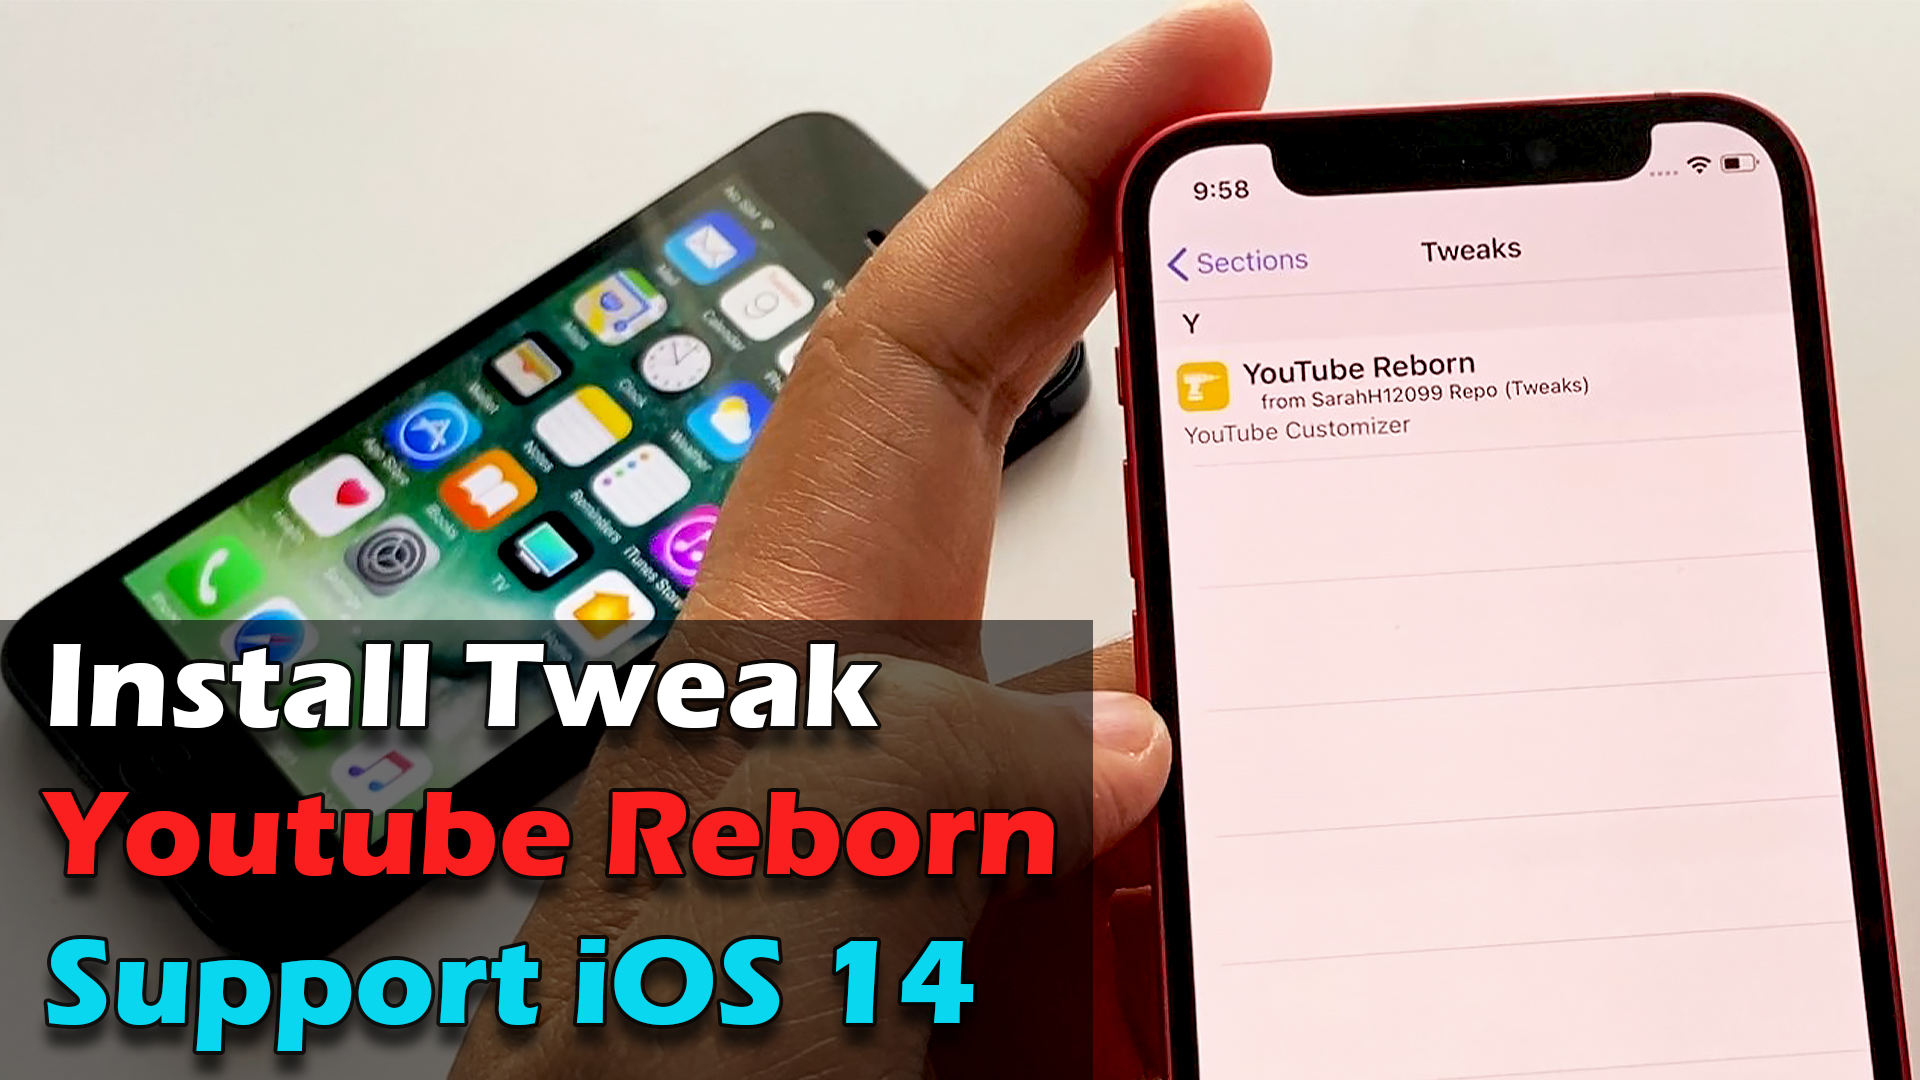 Tweak and Tuneup instal the new version for iphone